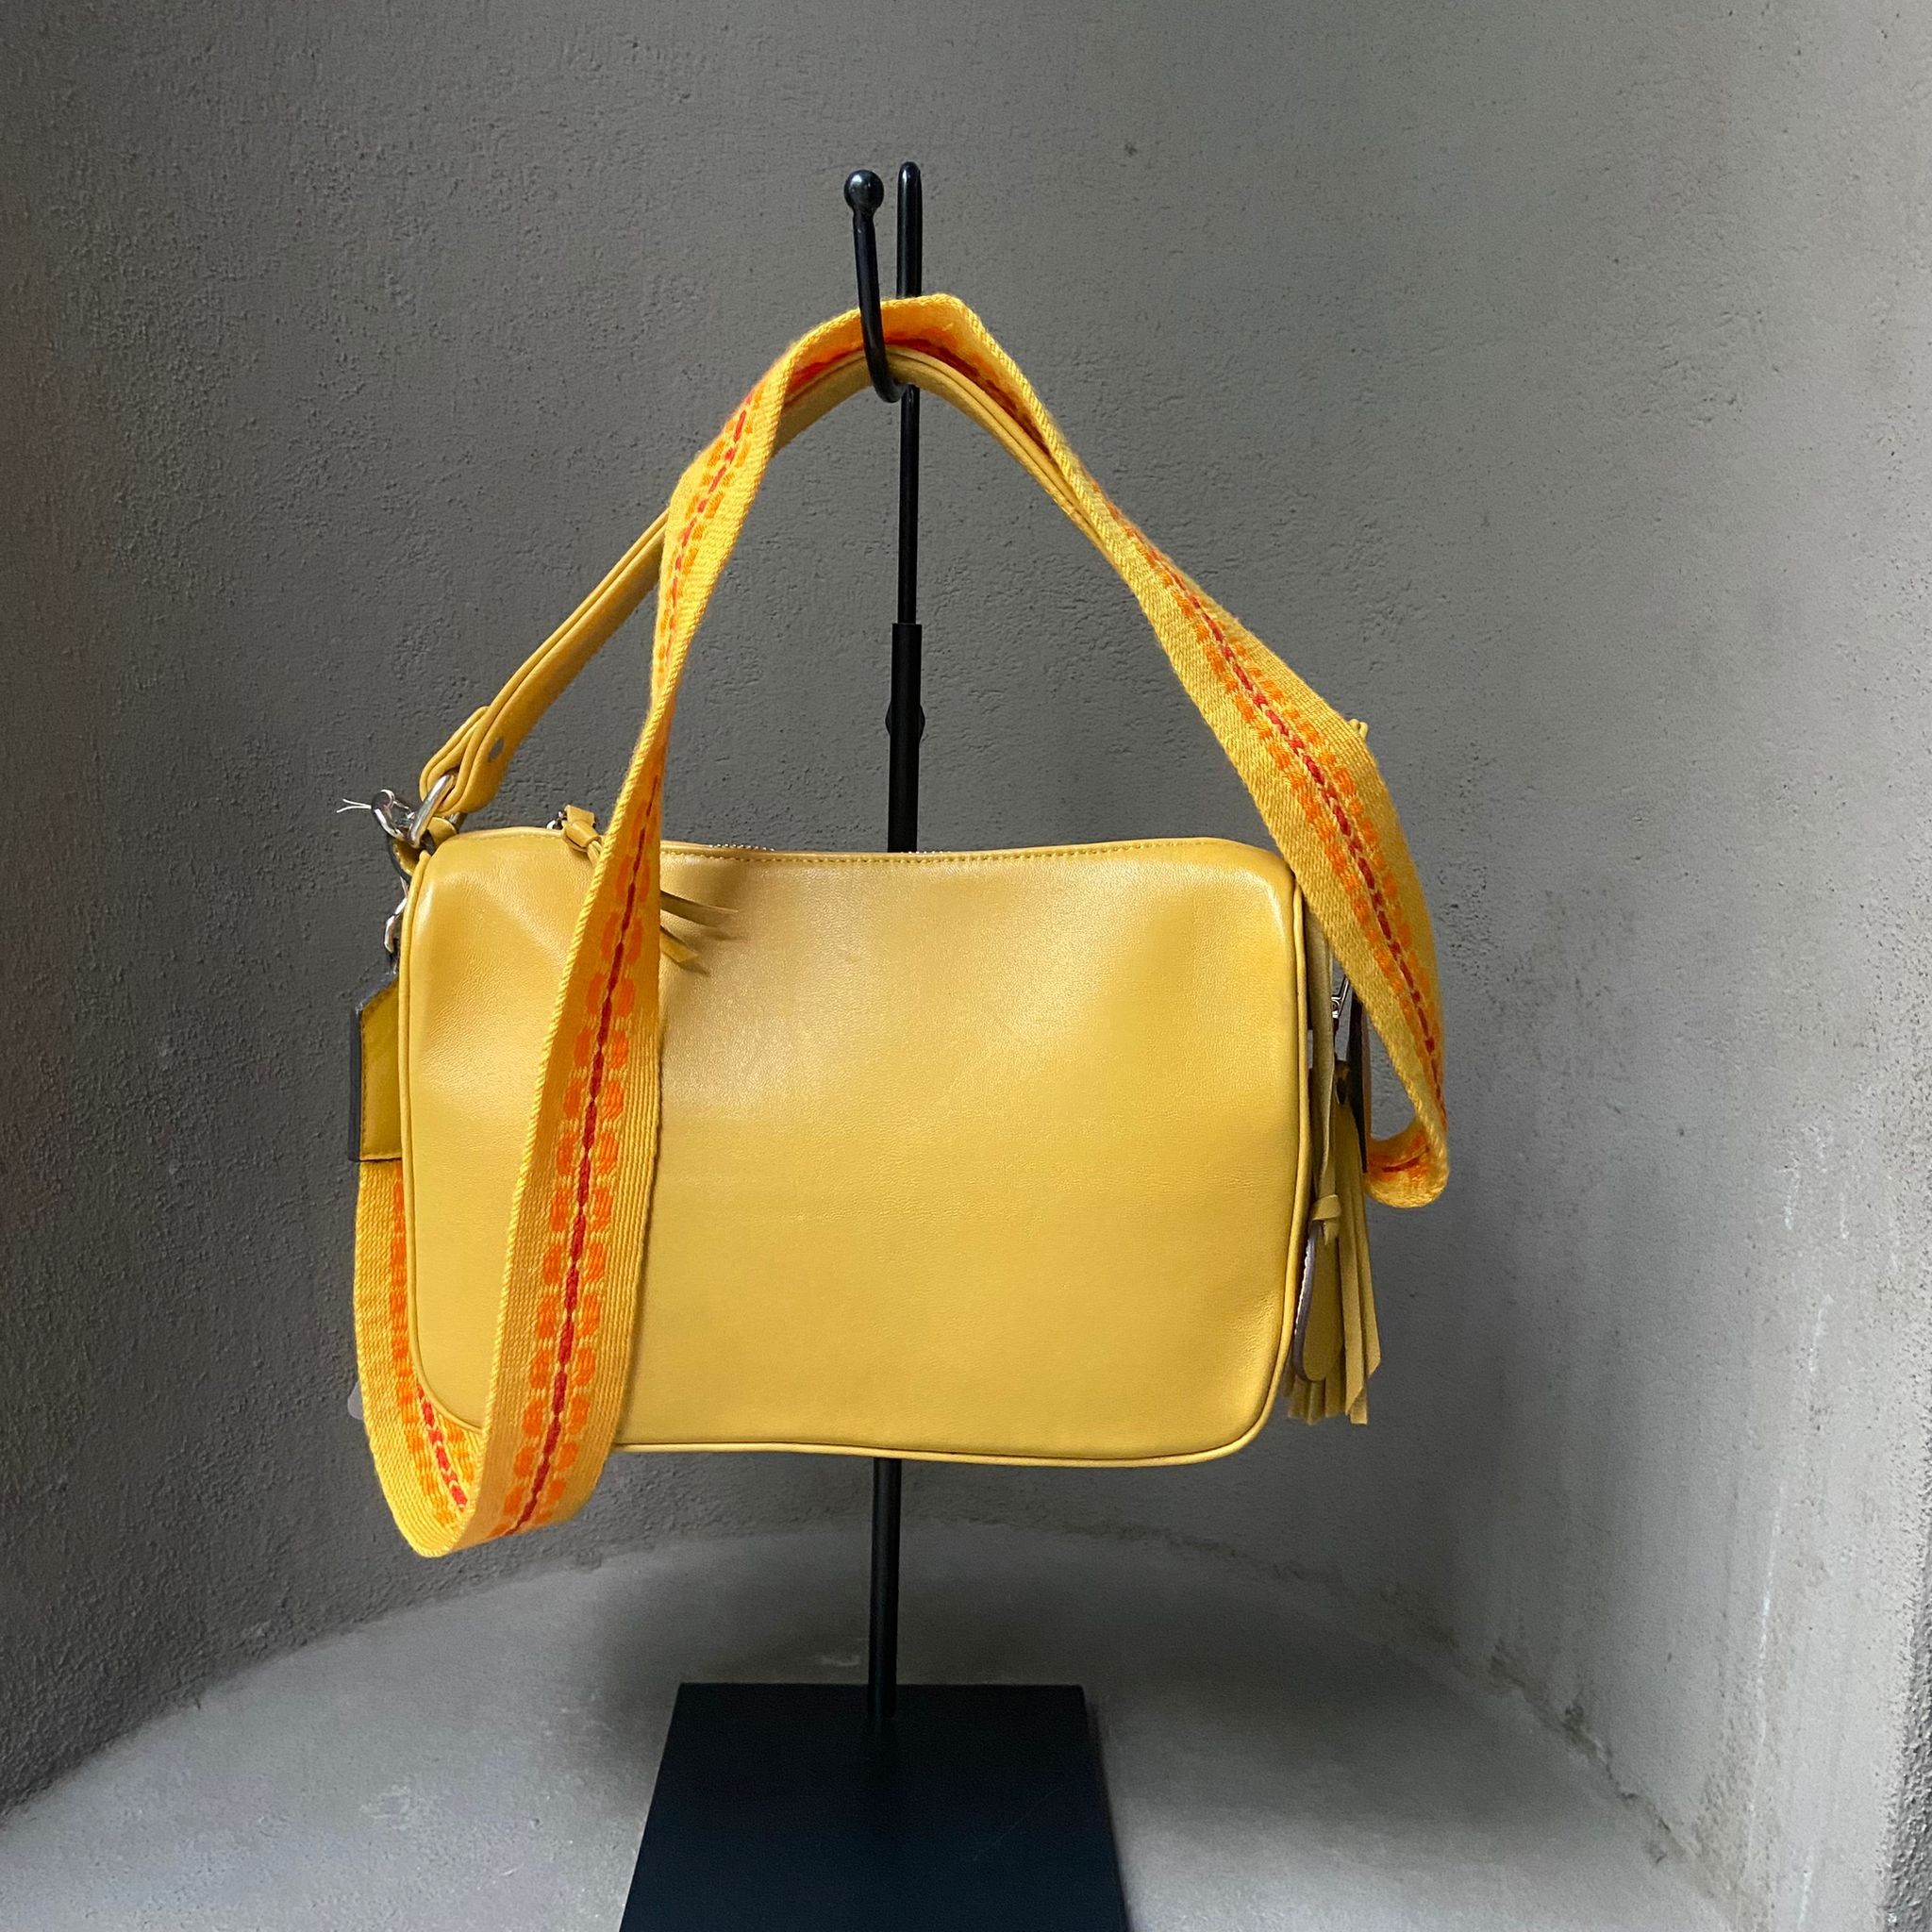 Toffee Yellow Bag